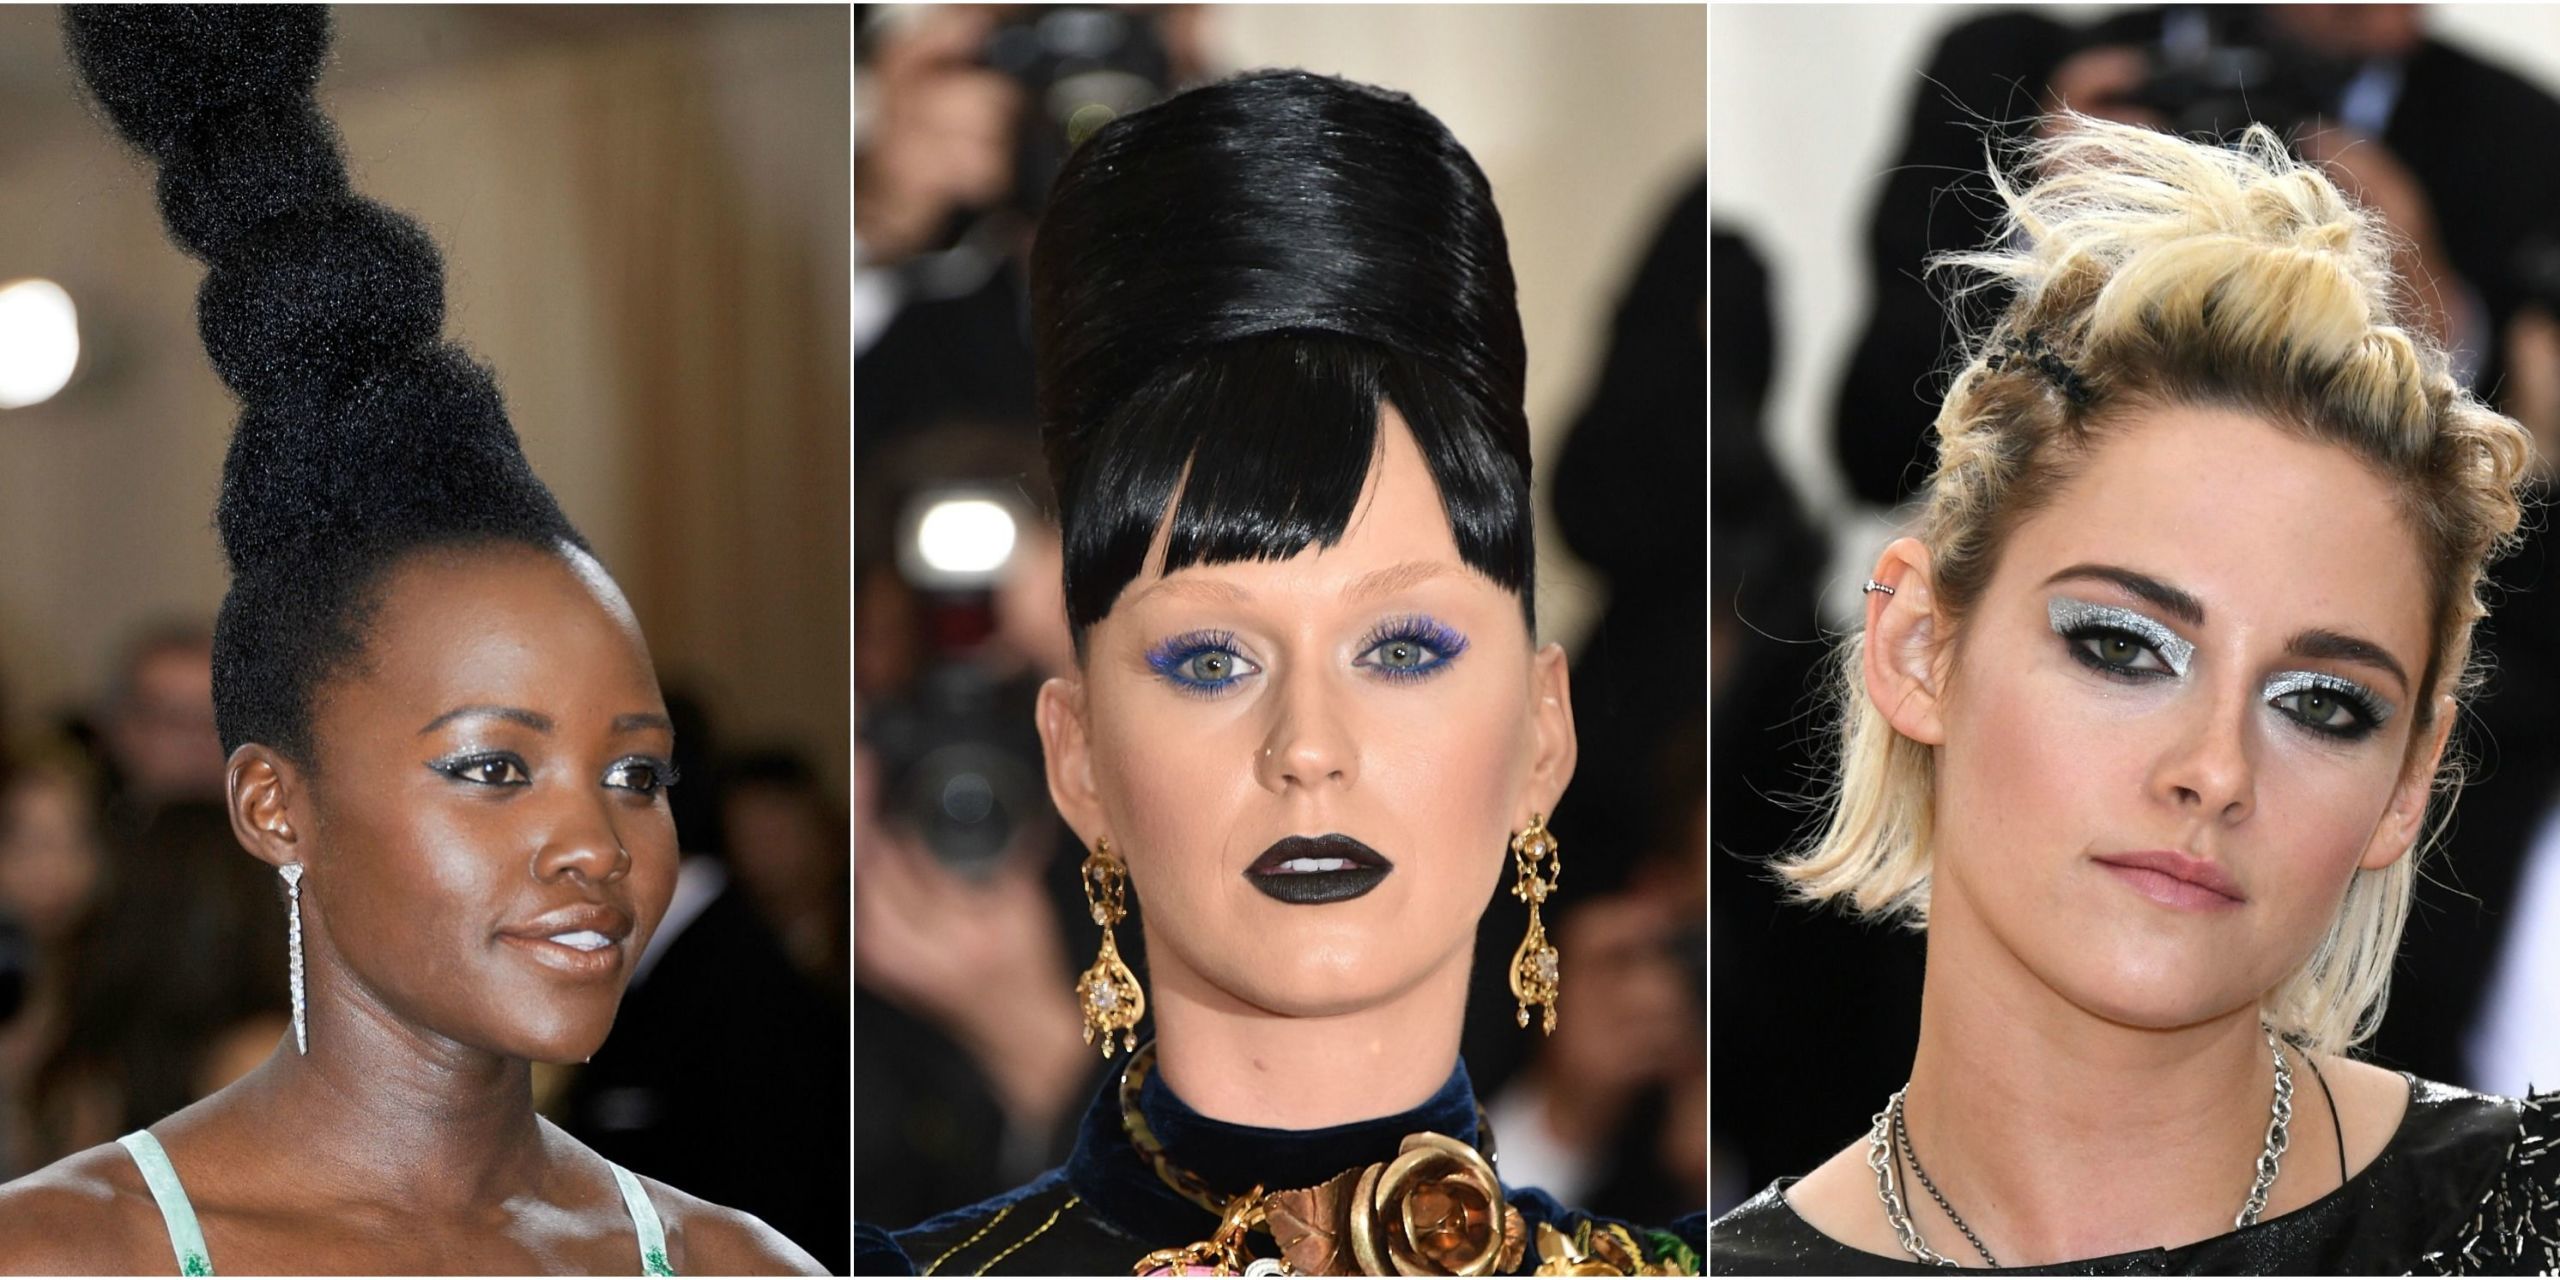 The 'Party' Bob Is The SAG Awards 2023 Standout Hair Trend